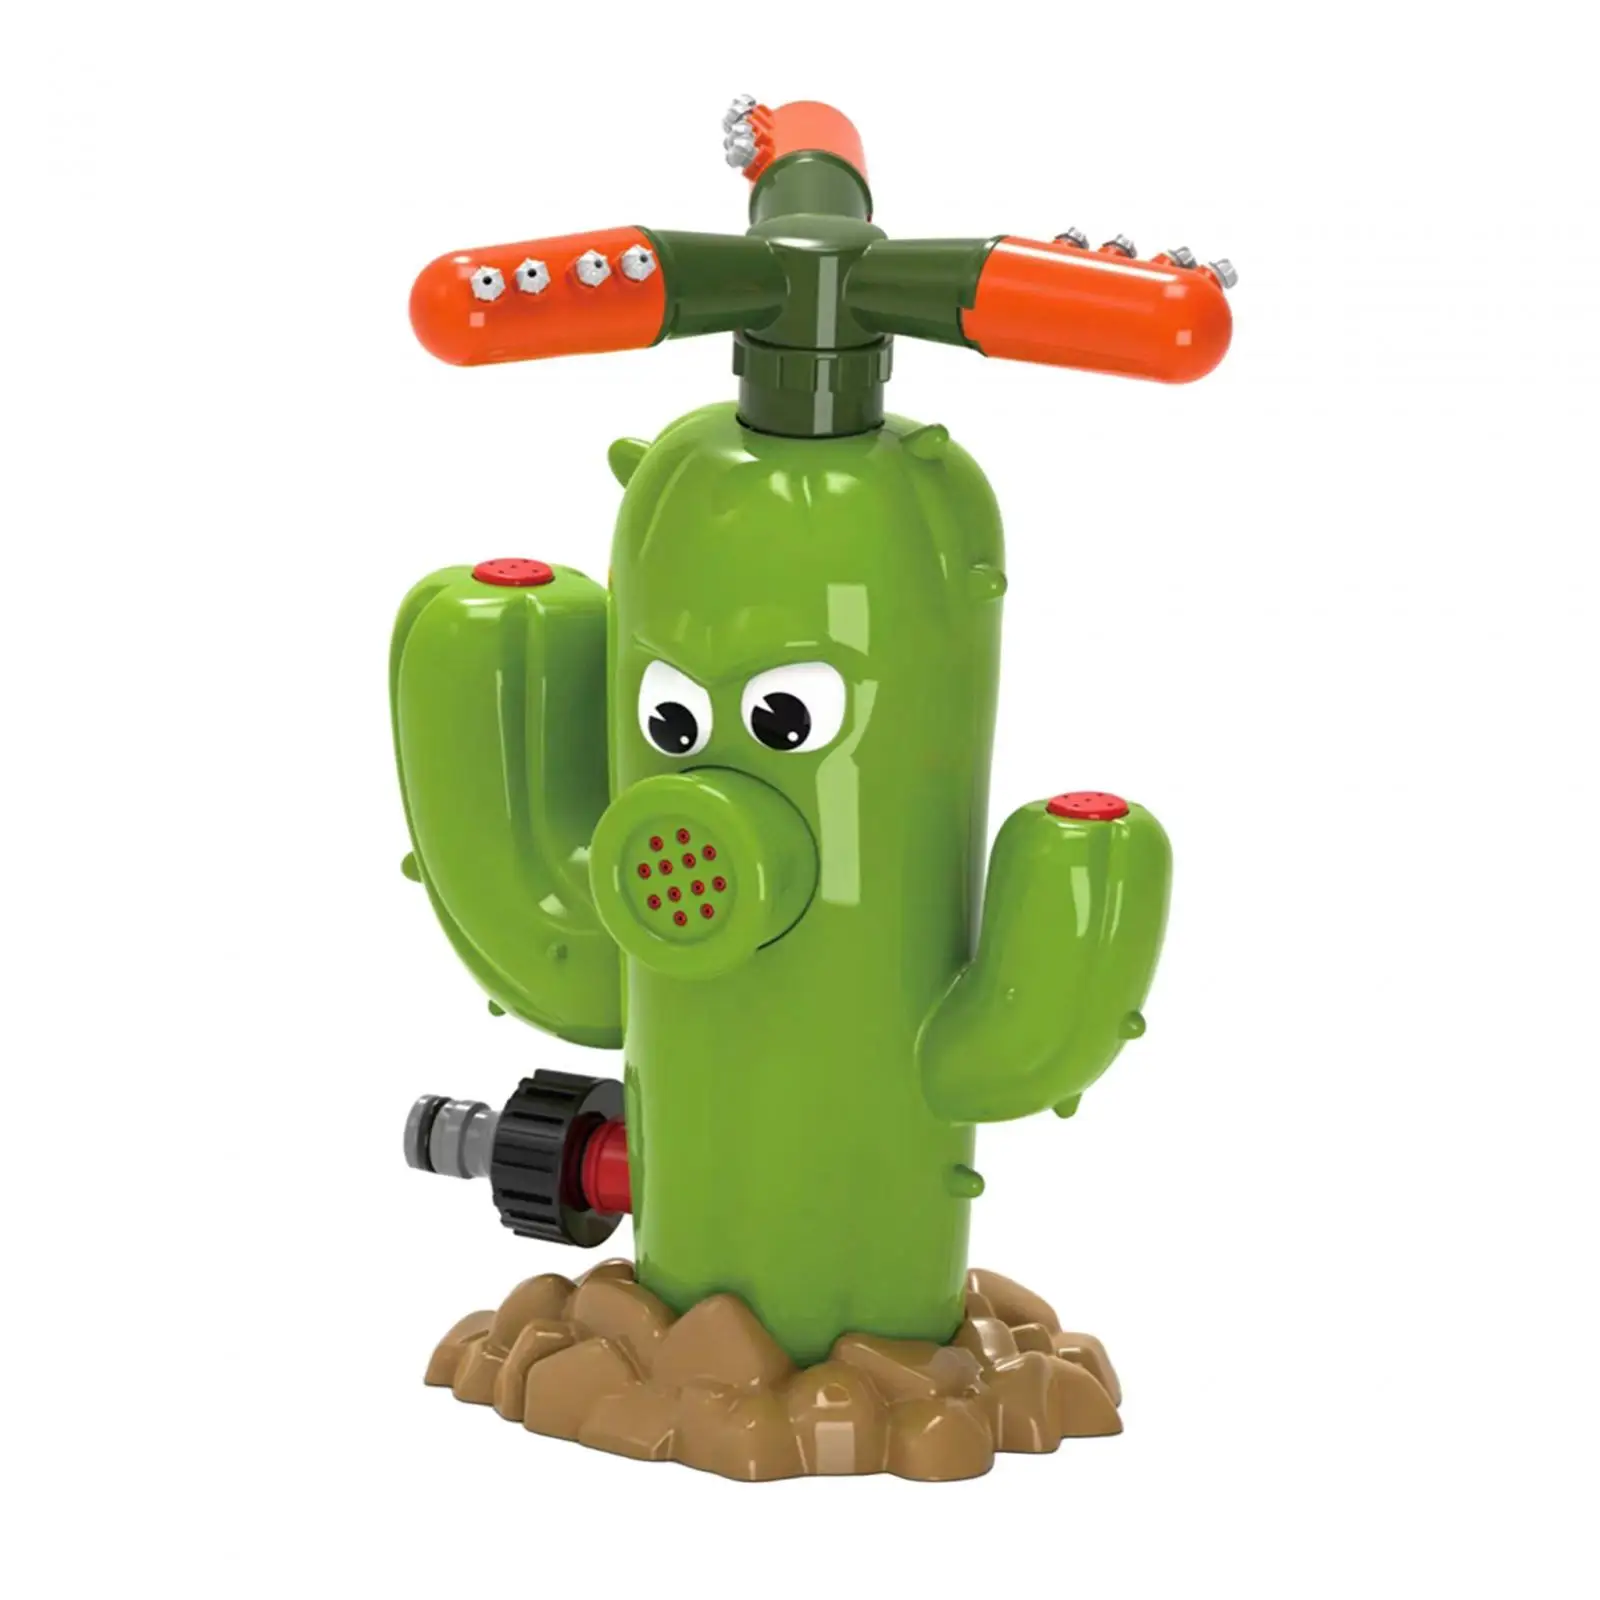 Sprinklers Outdoor Toy Summer Backyard Toys Water Sprayer for Birthday Gift